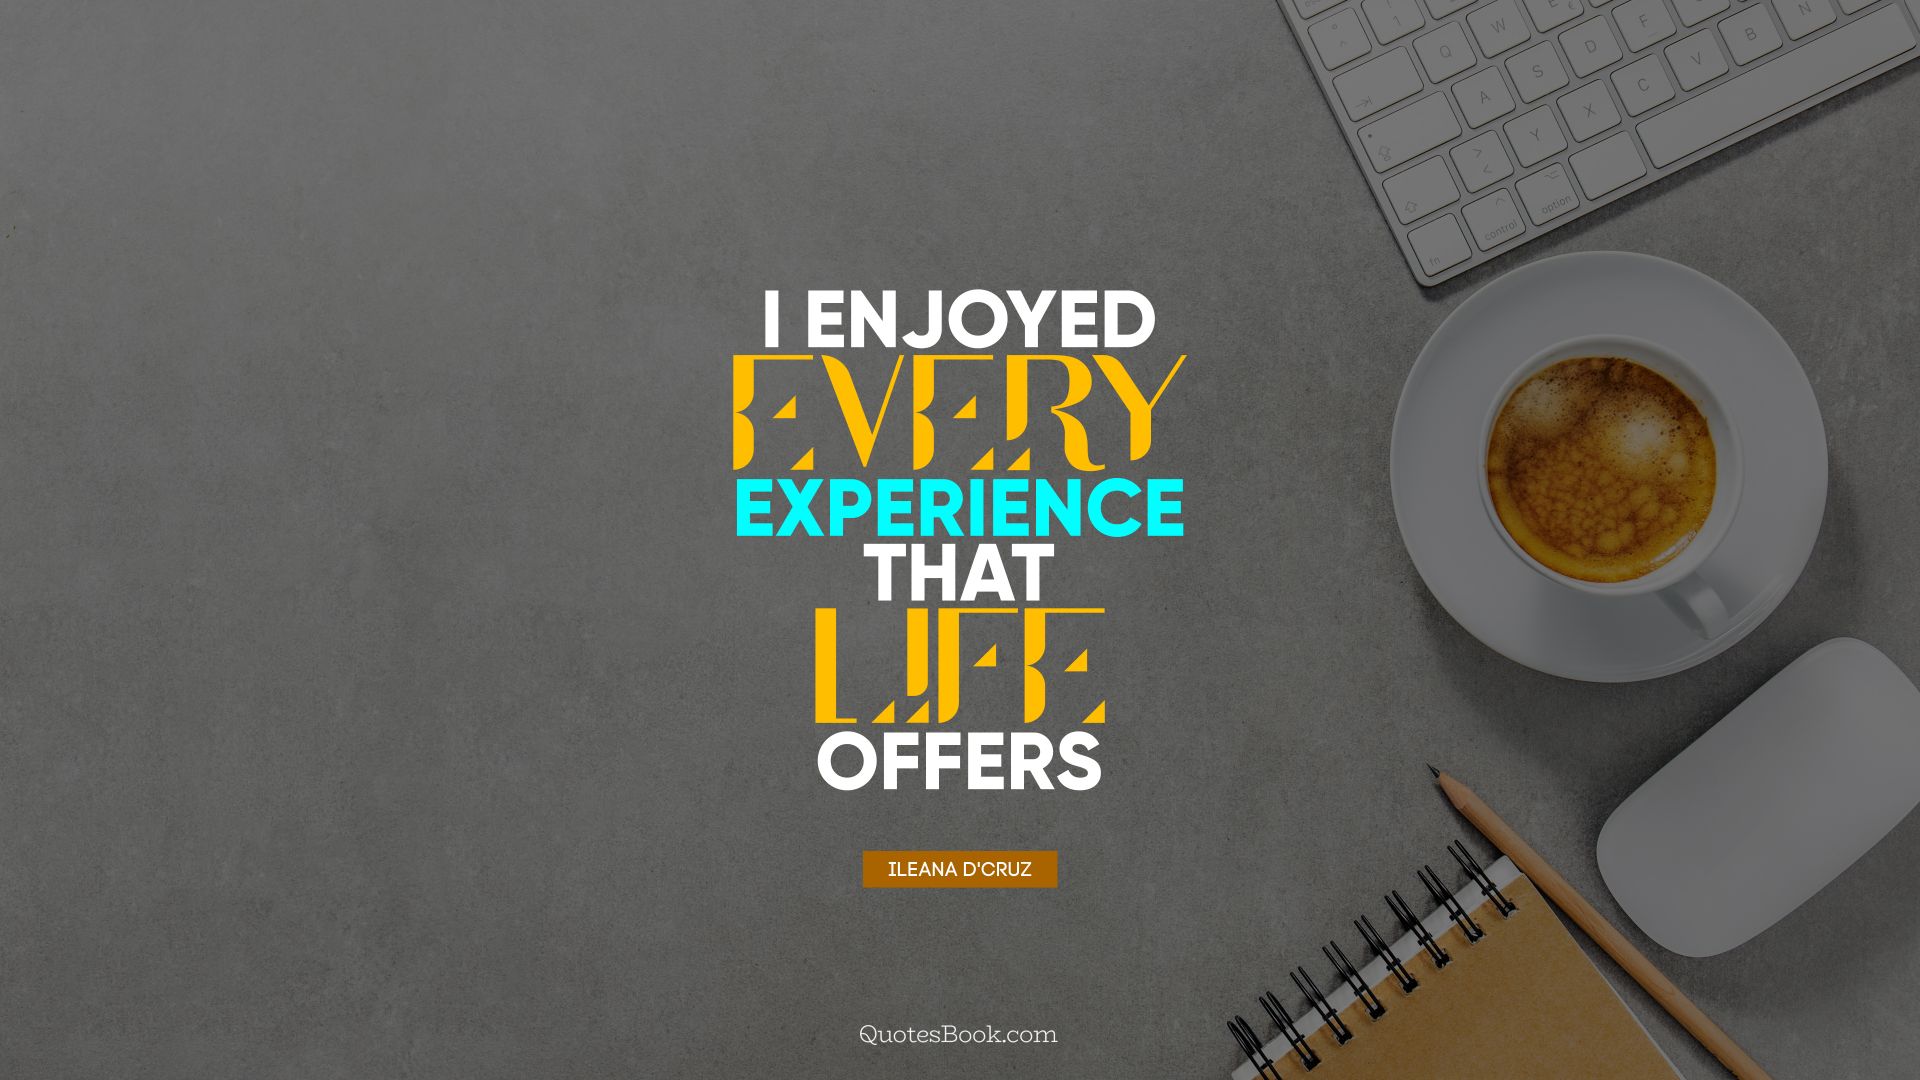 I enjoyed every experience that life offers. - Quote by Ileana D'Cruz